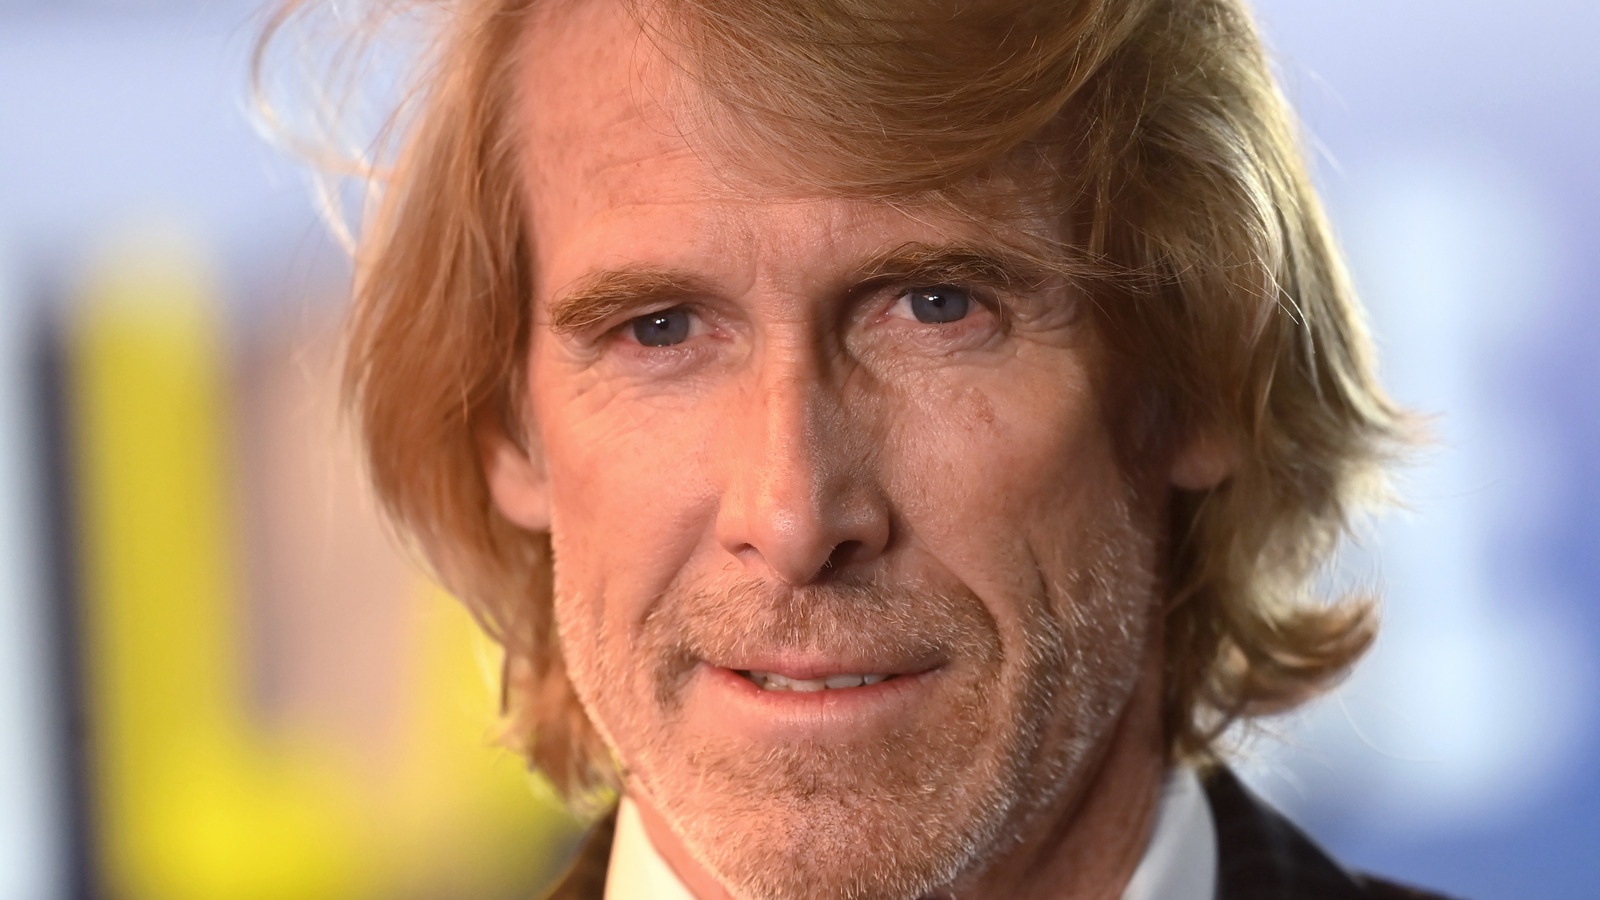 The Hilarious Advice Steven Spielberg Gave Michael Bay About The Transformers Franchise